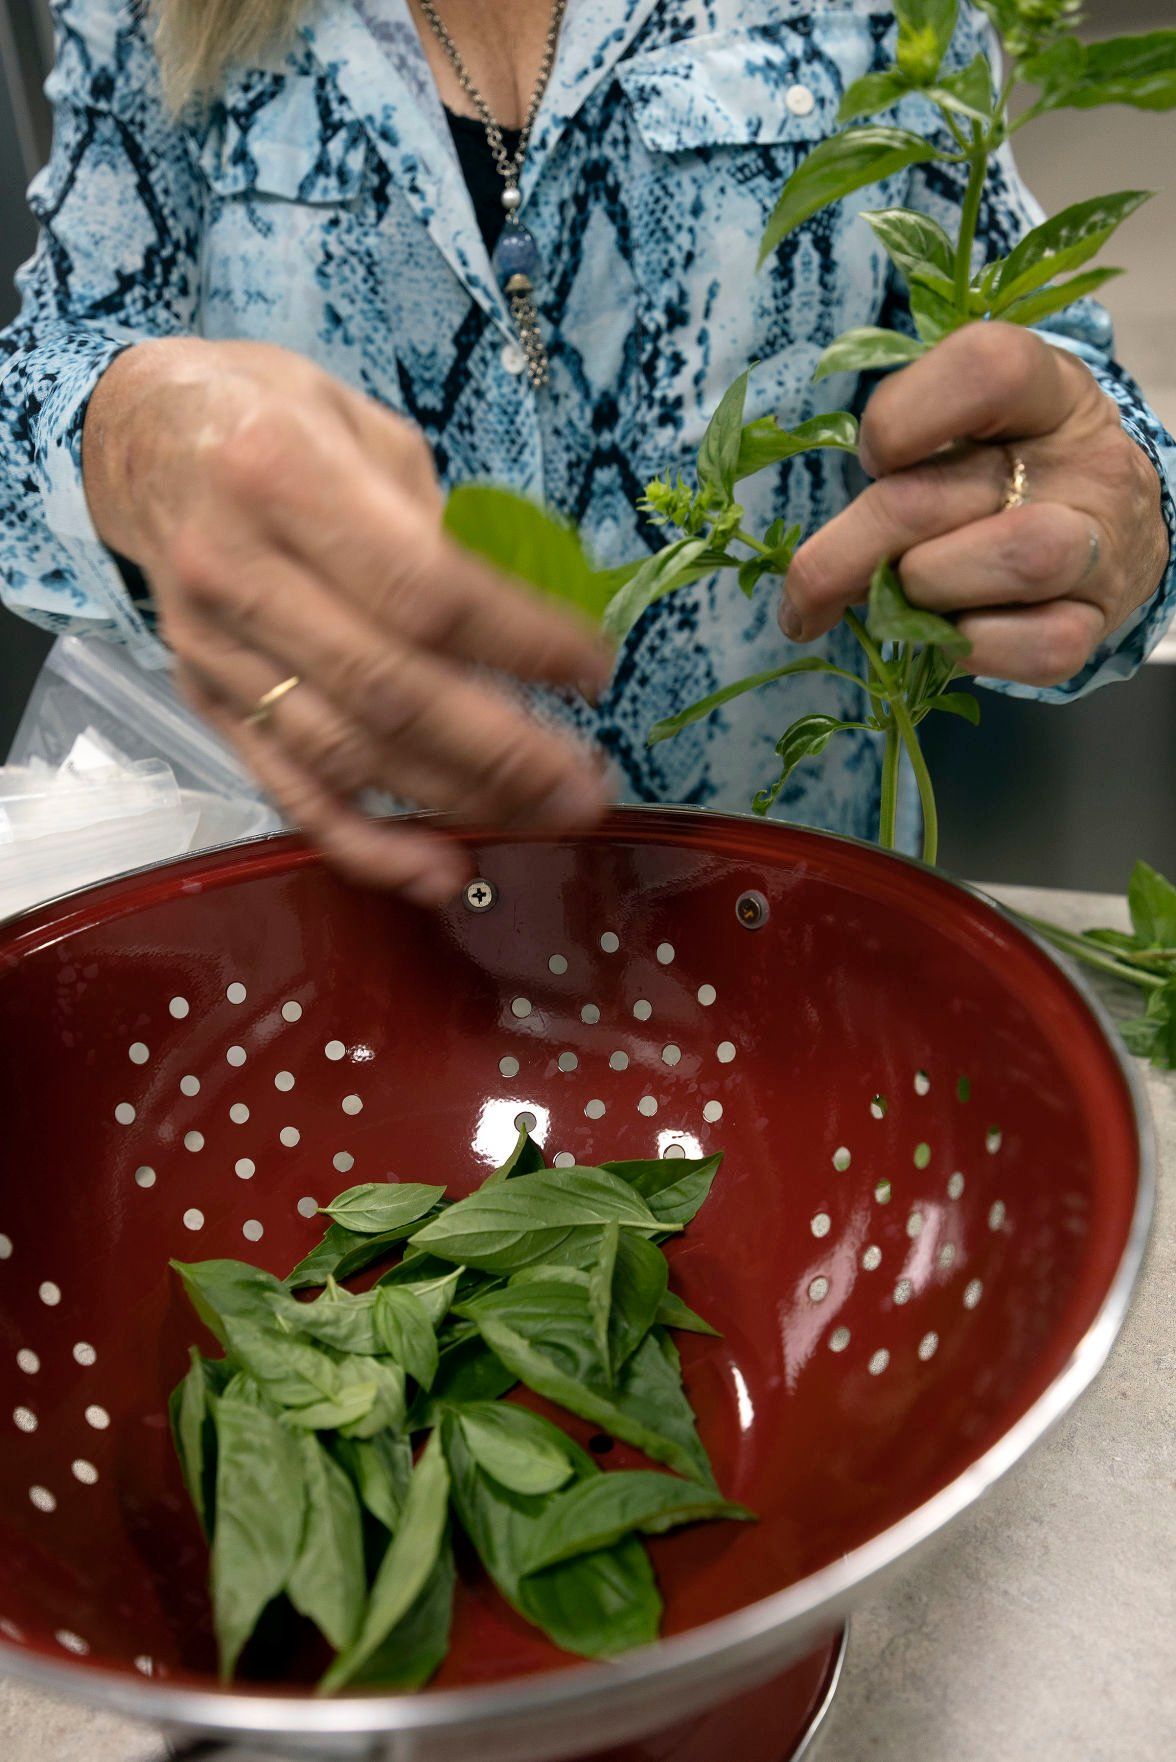 Jill Wagener places basil leaves into a colander to be cleaned. Her children say she has “always been obsessed with basil.”    PHOTO CREDIT: Stephen Gassman